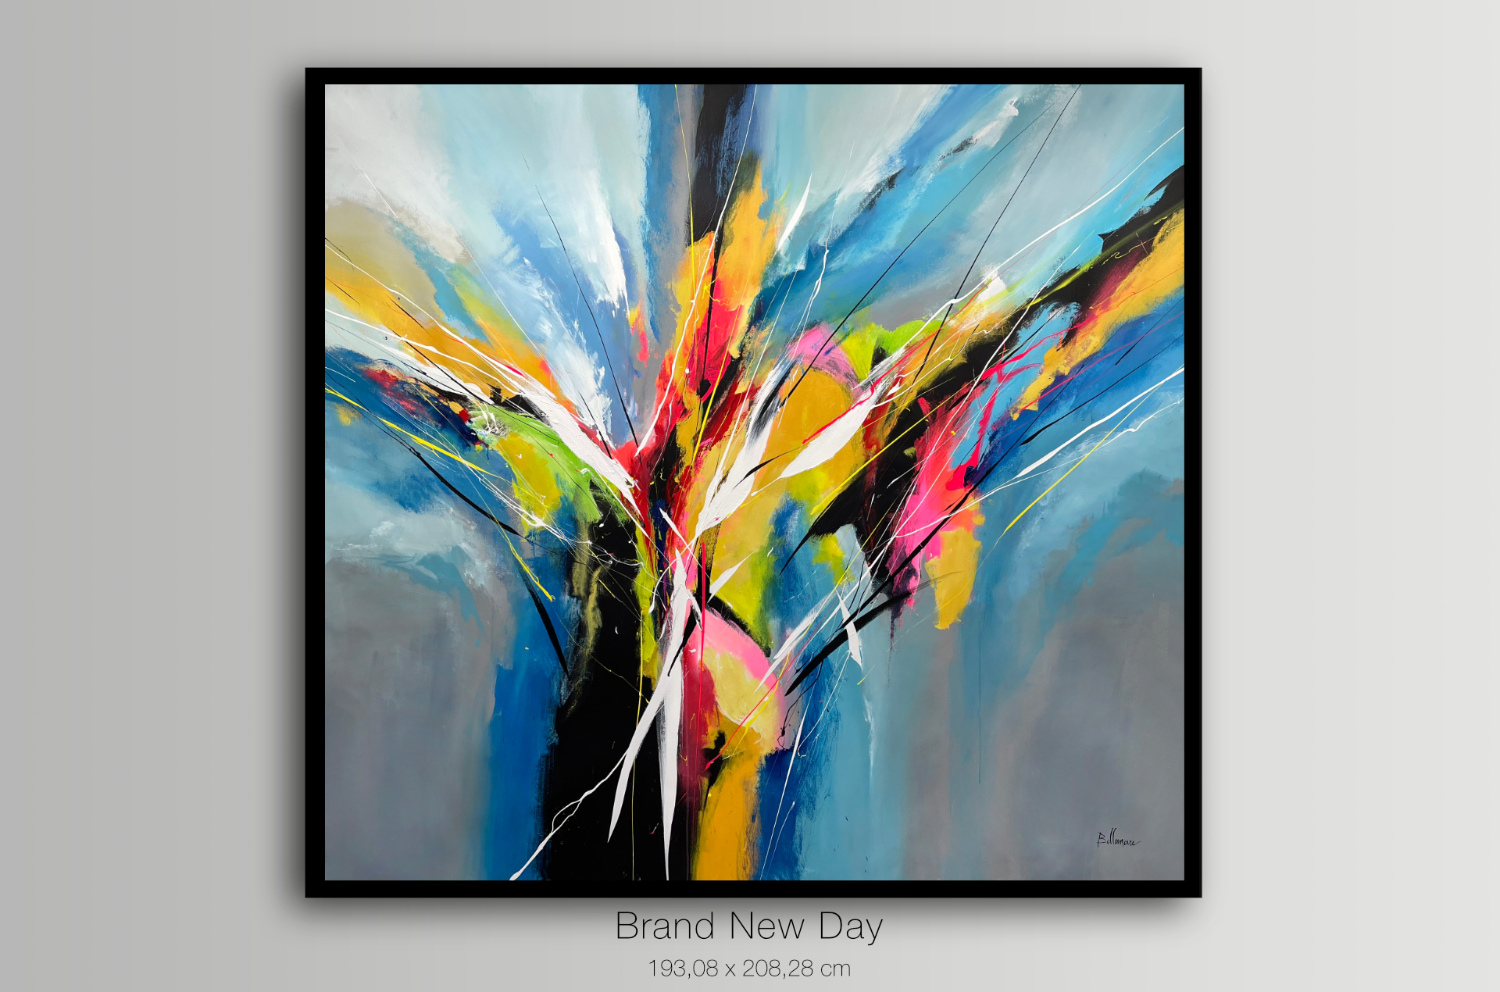 Brand New Day - Featured